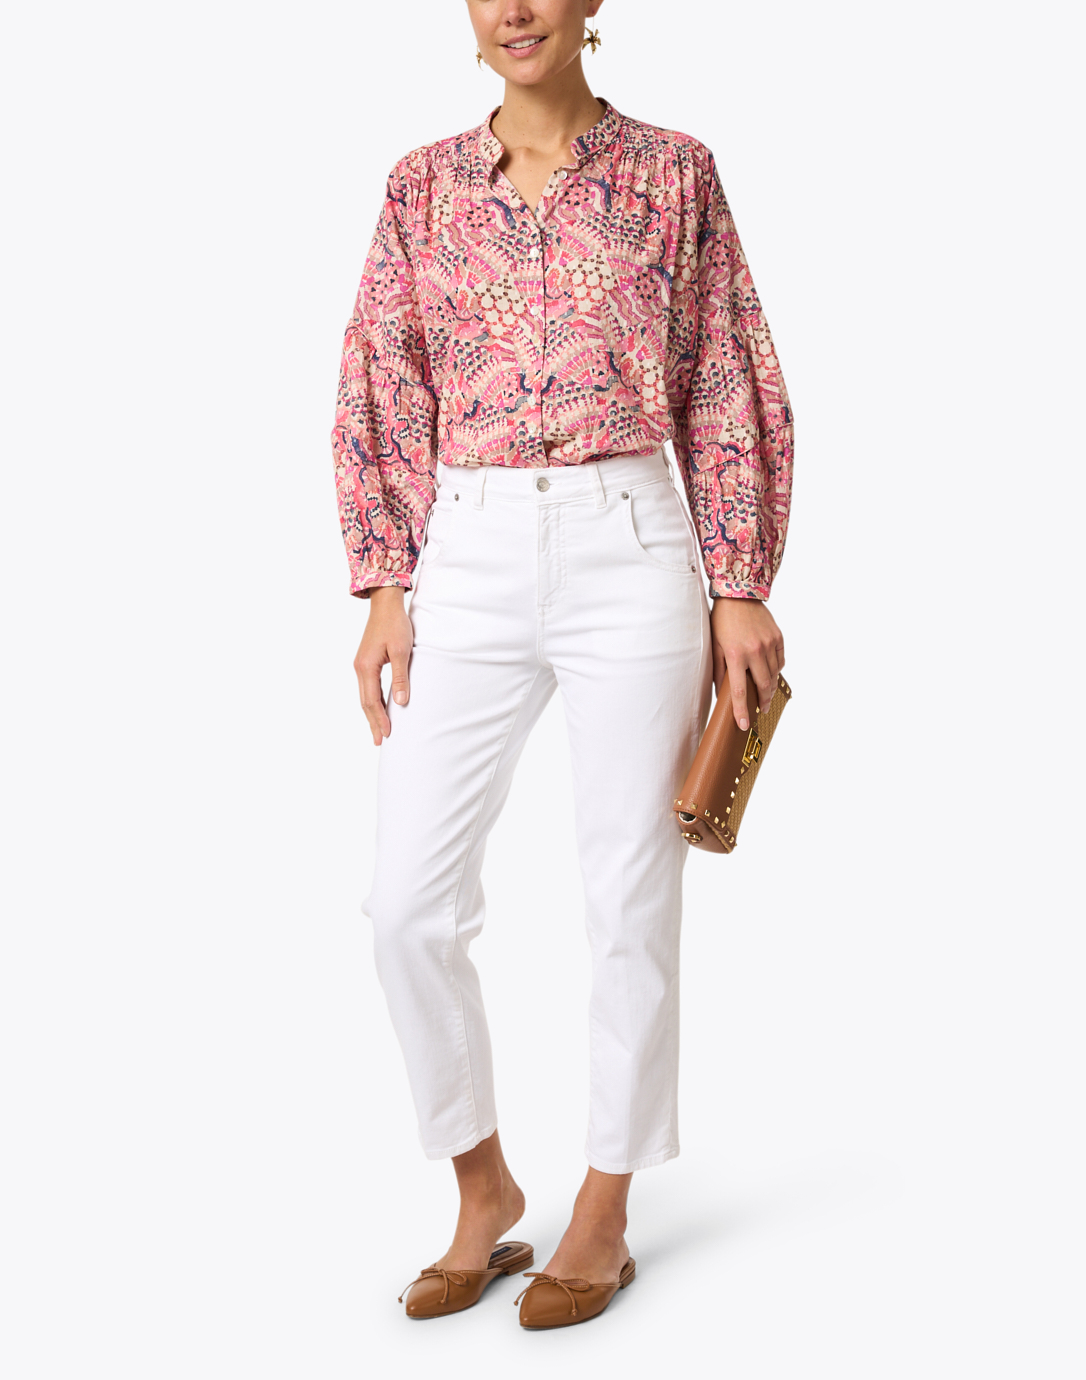 Sheer Cotton Relaxed Long-Sleeve Shirt (Floral) (Ines de la